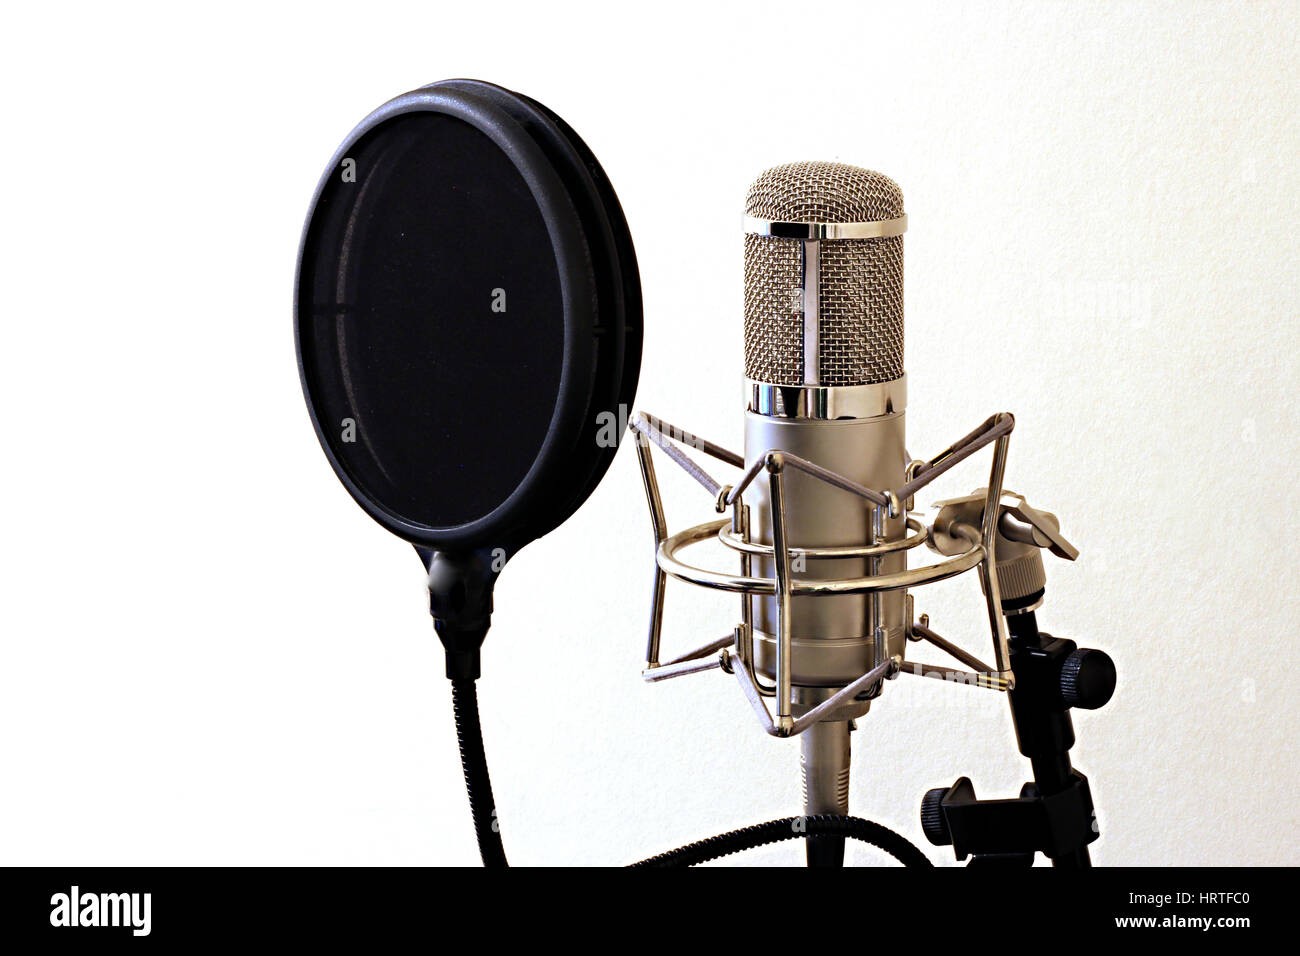 Professional Studio Microphone on stand Stock Photo